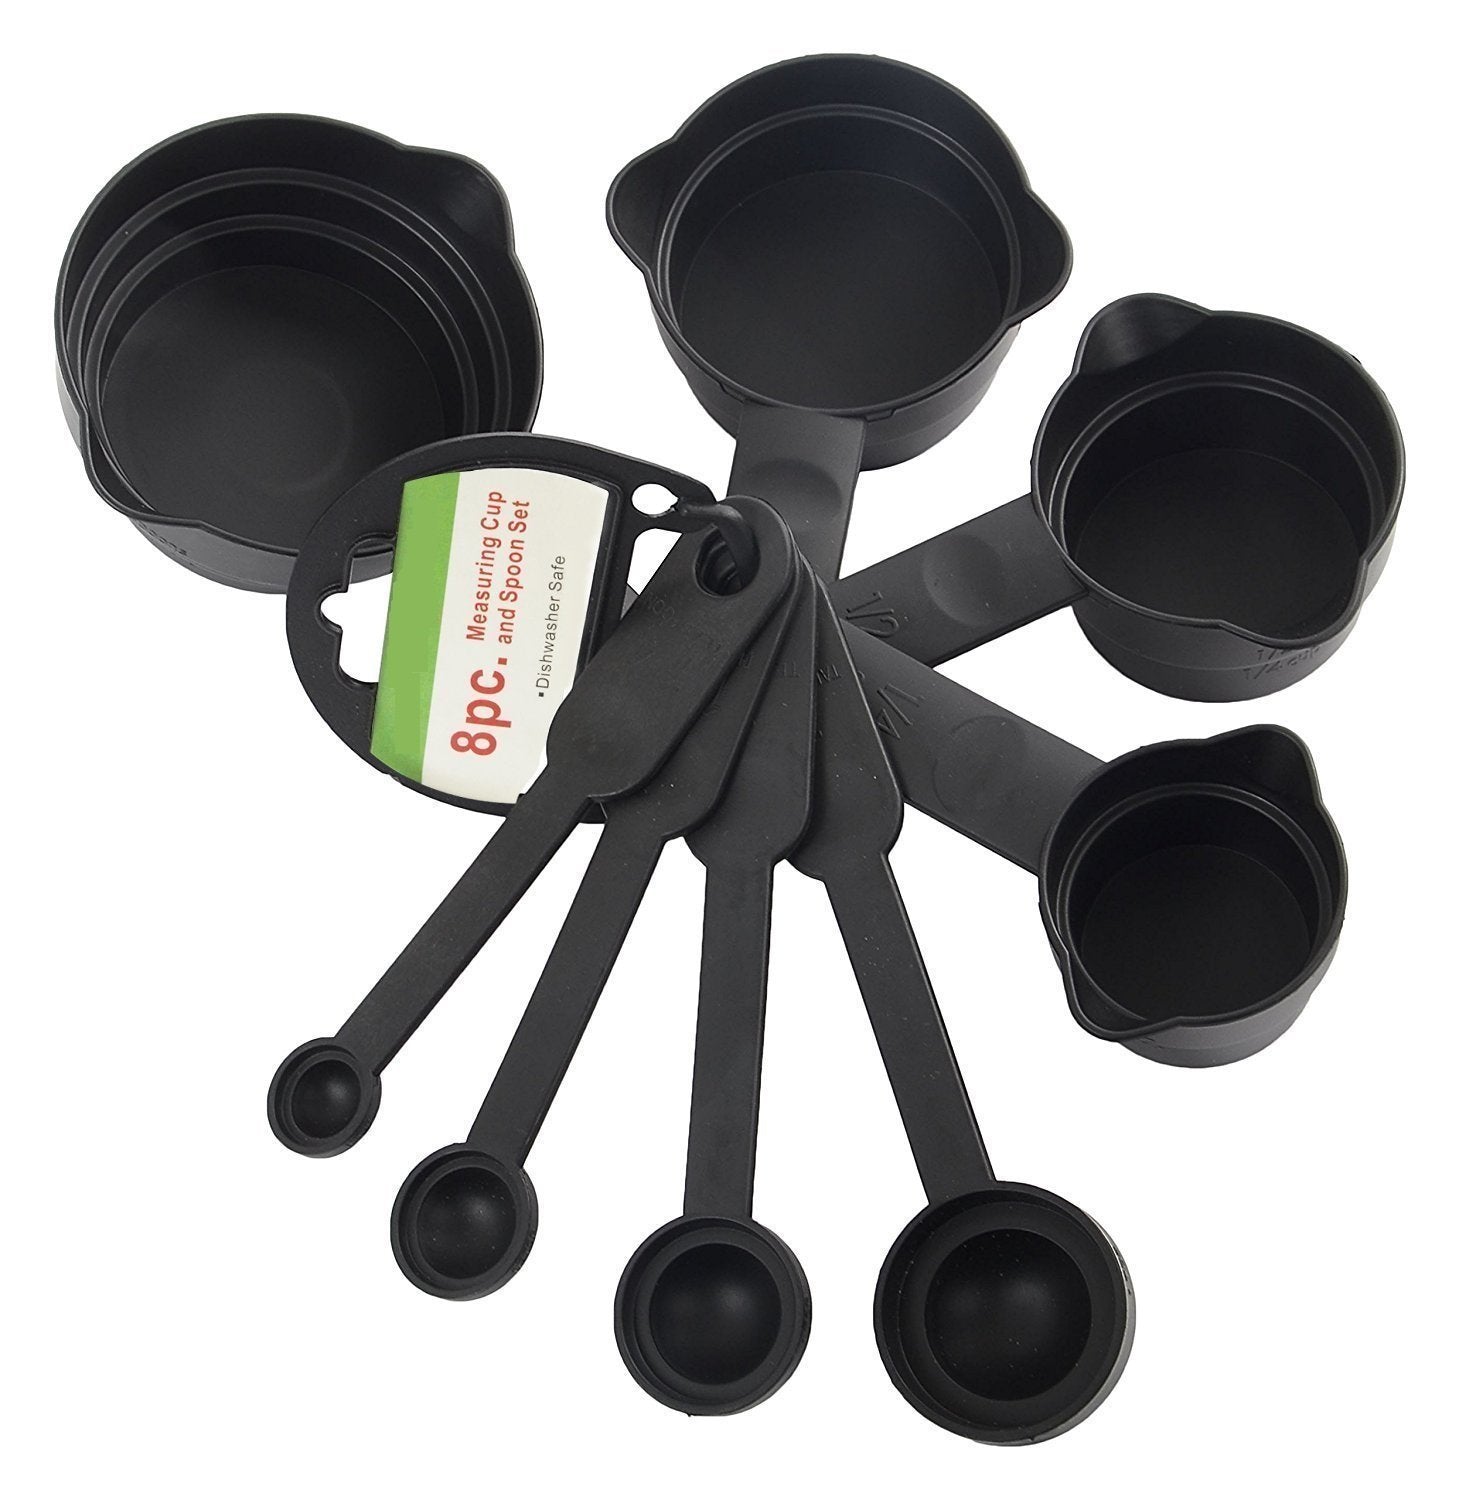 0106 Plastic Measuring Cups and Spoons (8 Pcs, Black) - SkyShopy